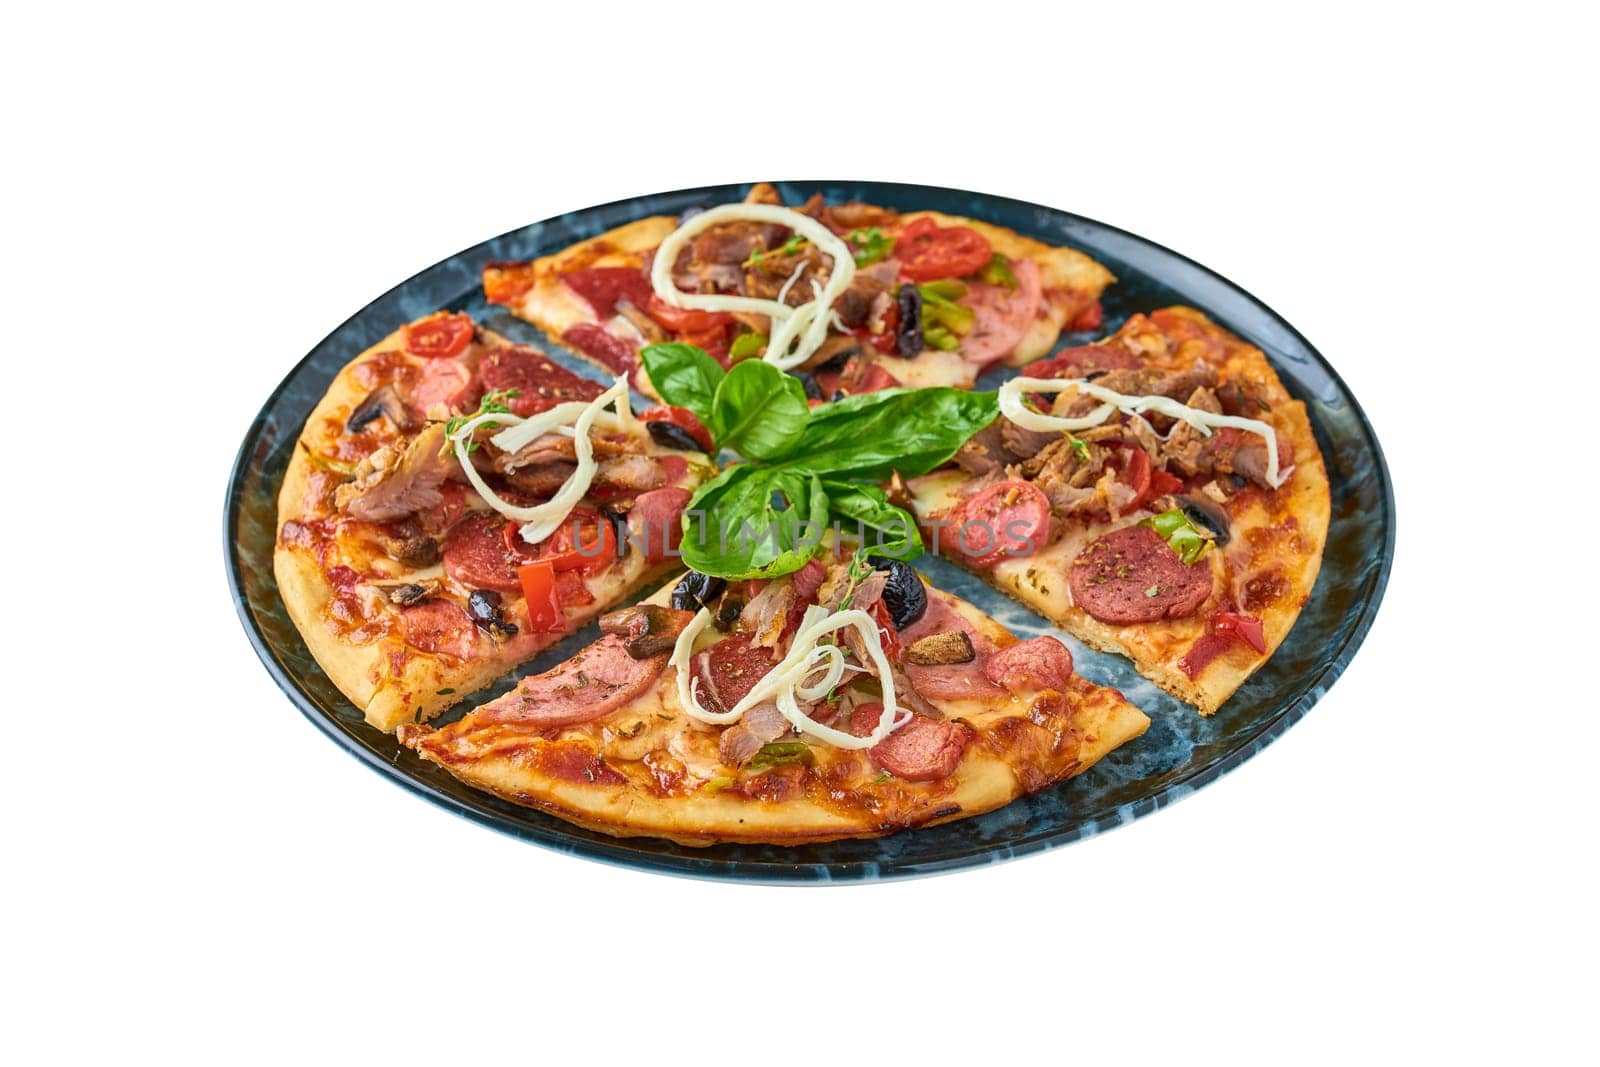 Supreme mixed pizza from top view on white background. by Sonat